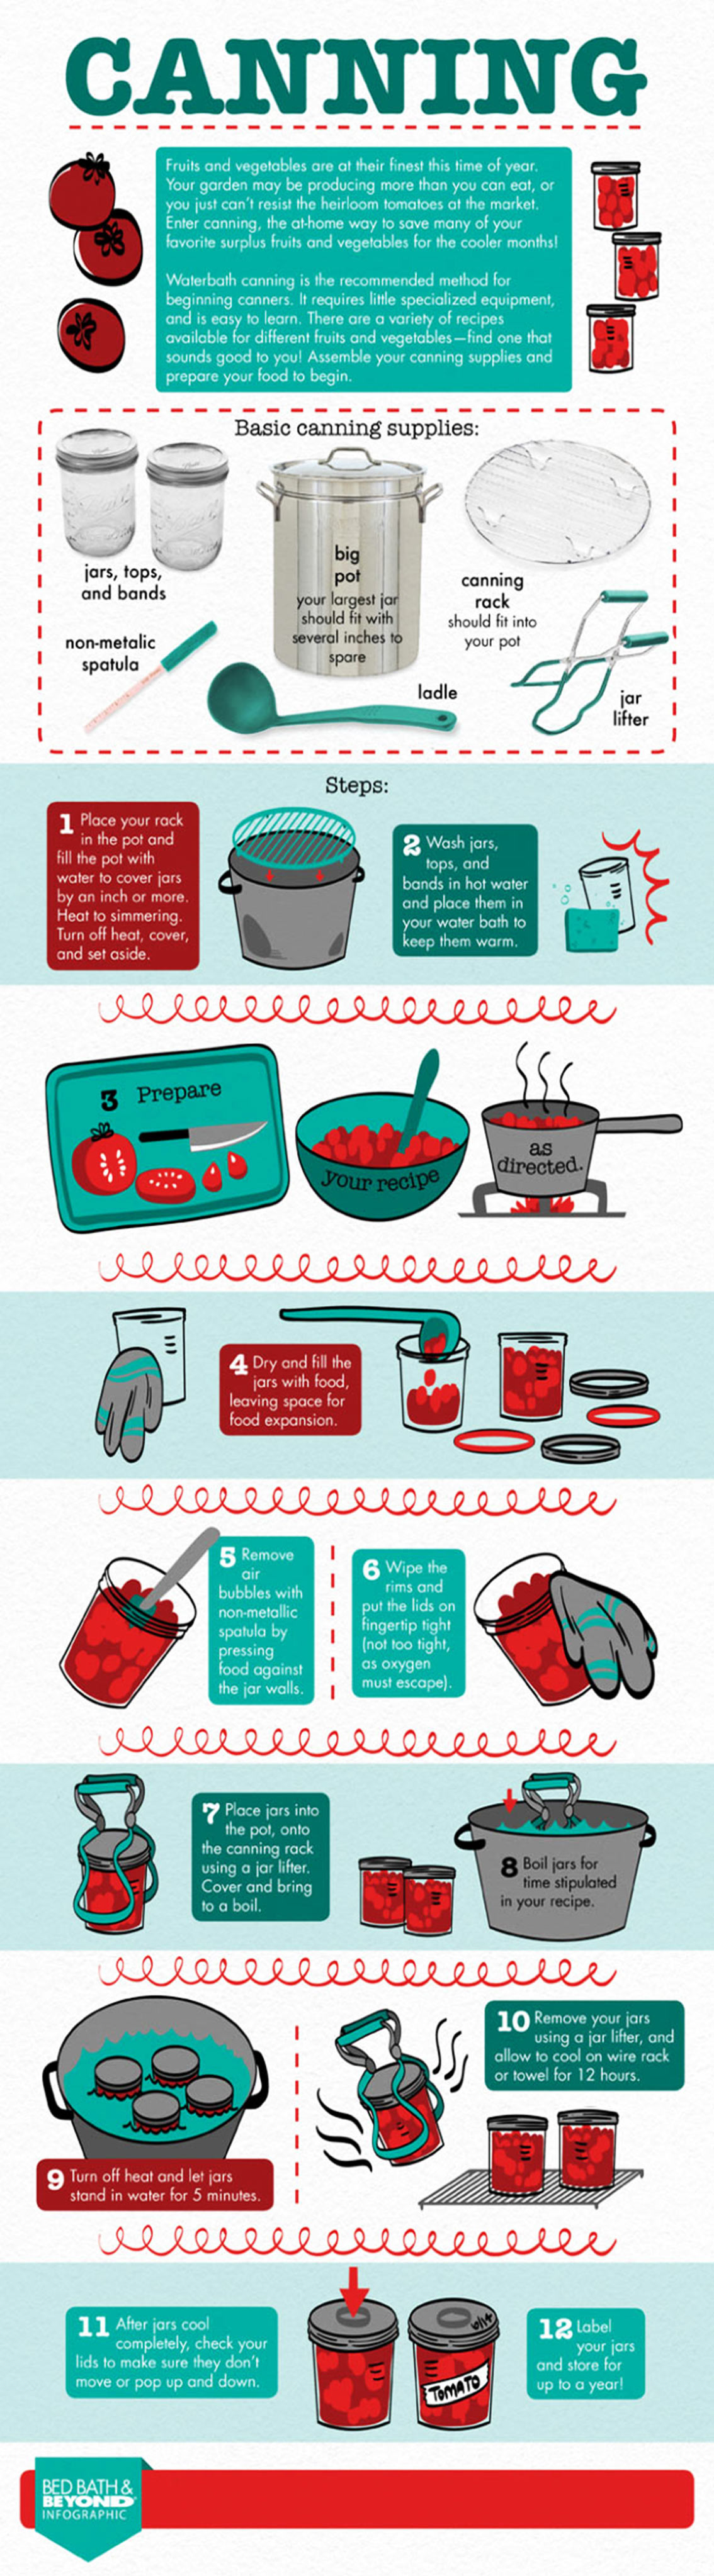 Canning Process for Food Preservation Infographic